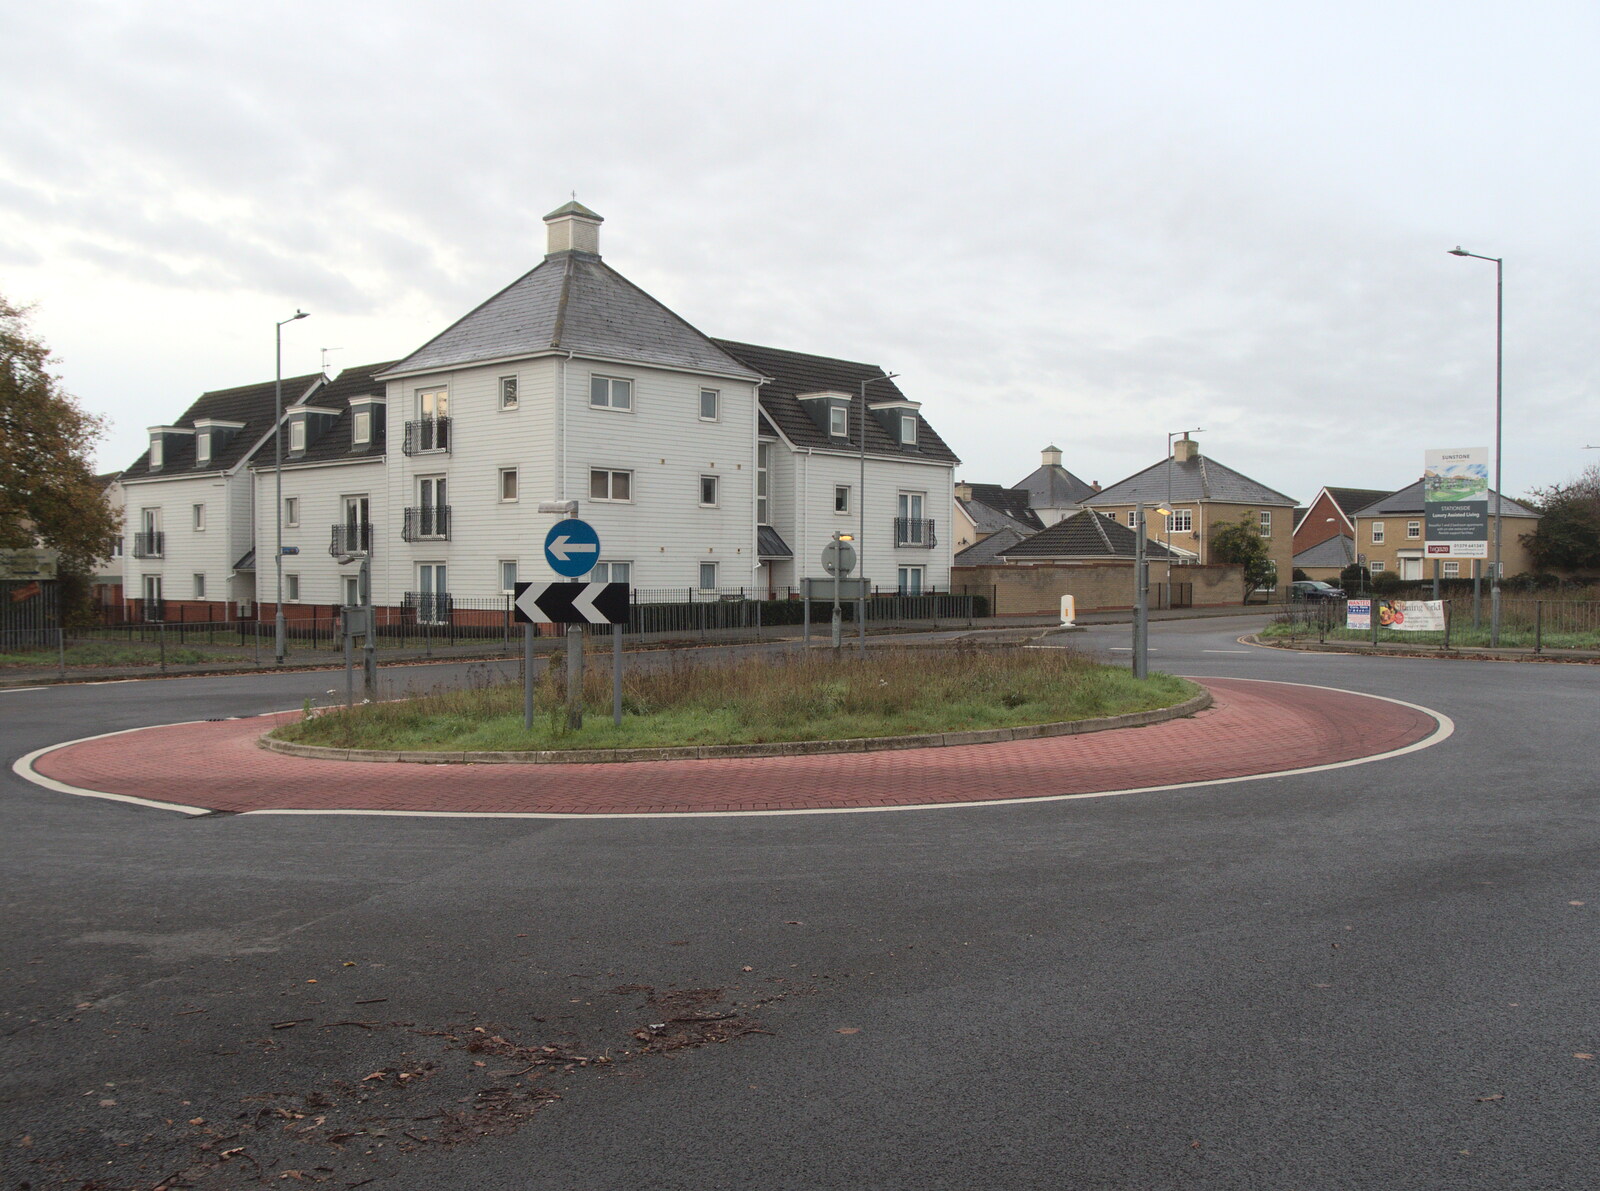 The Bleak House roundabout from Lunch in Norwich and the GSB at Gislingham, Suffolk - 26th November 2022